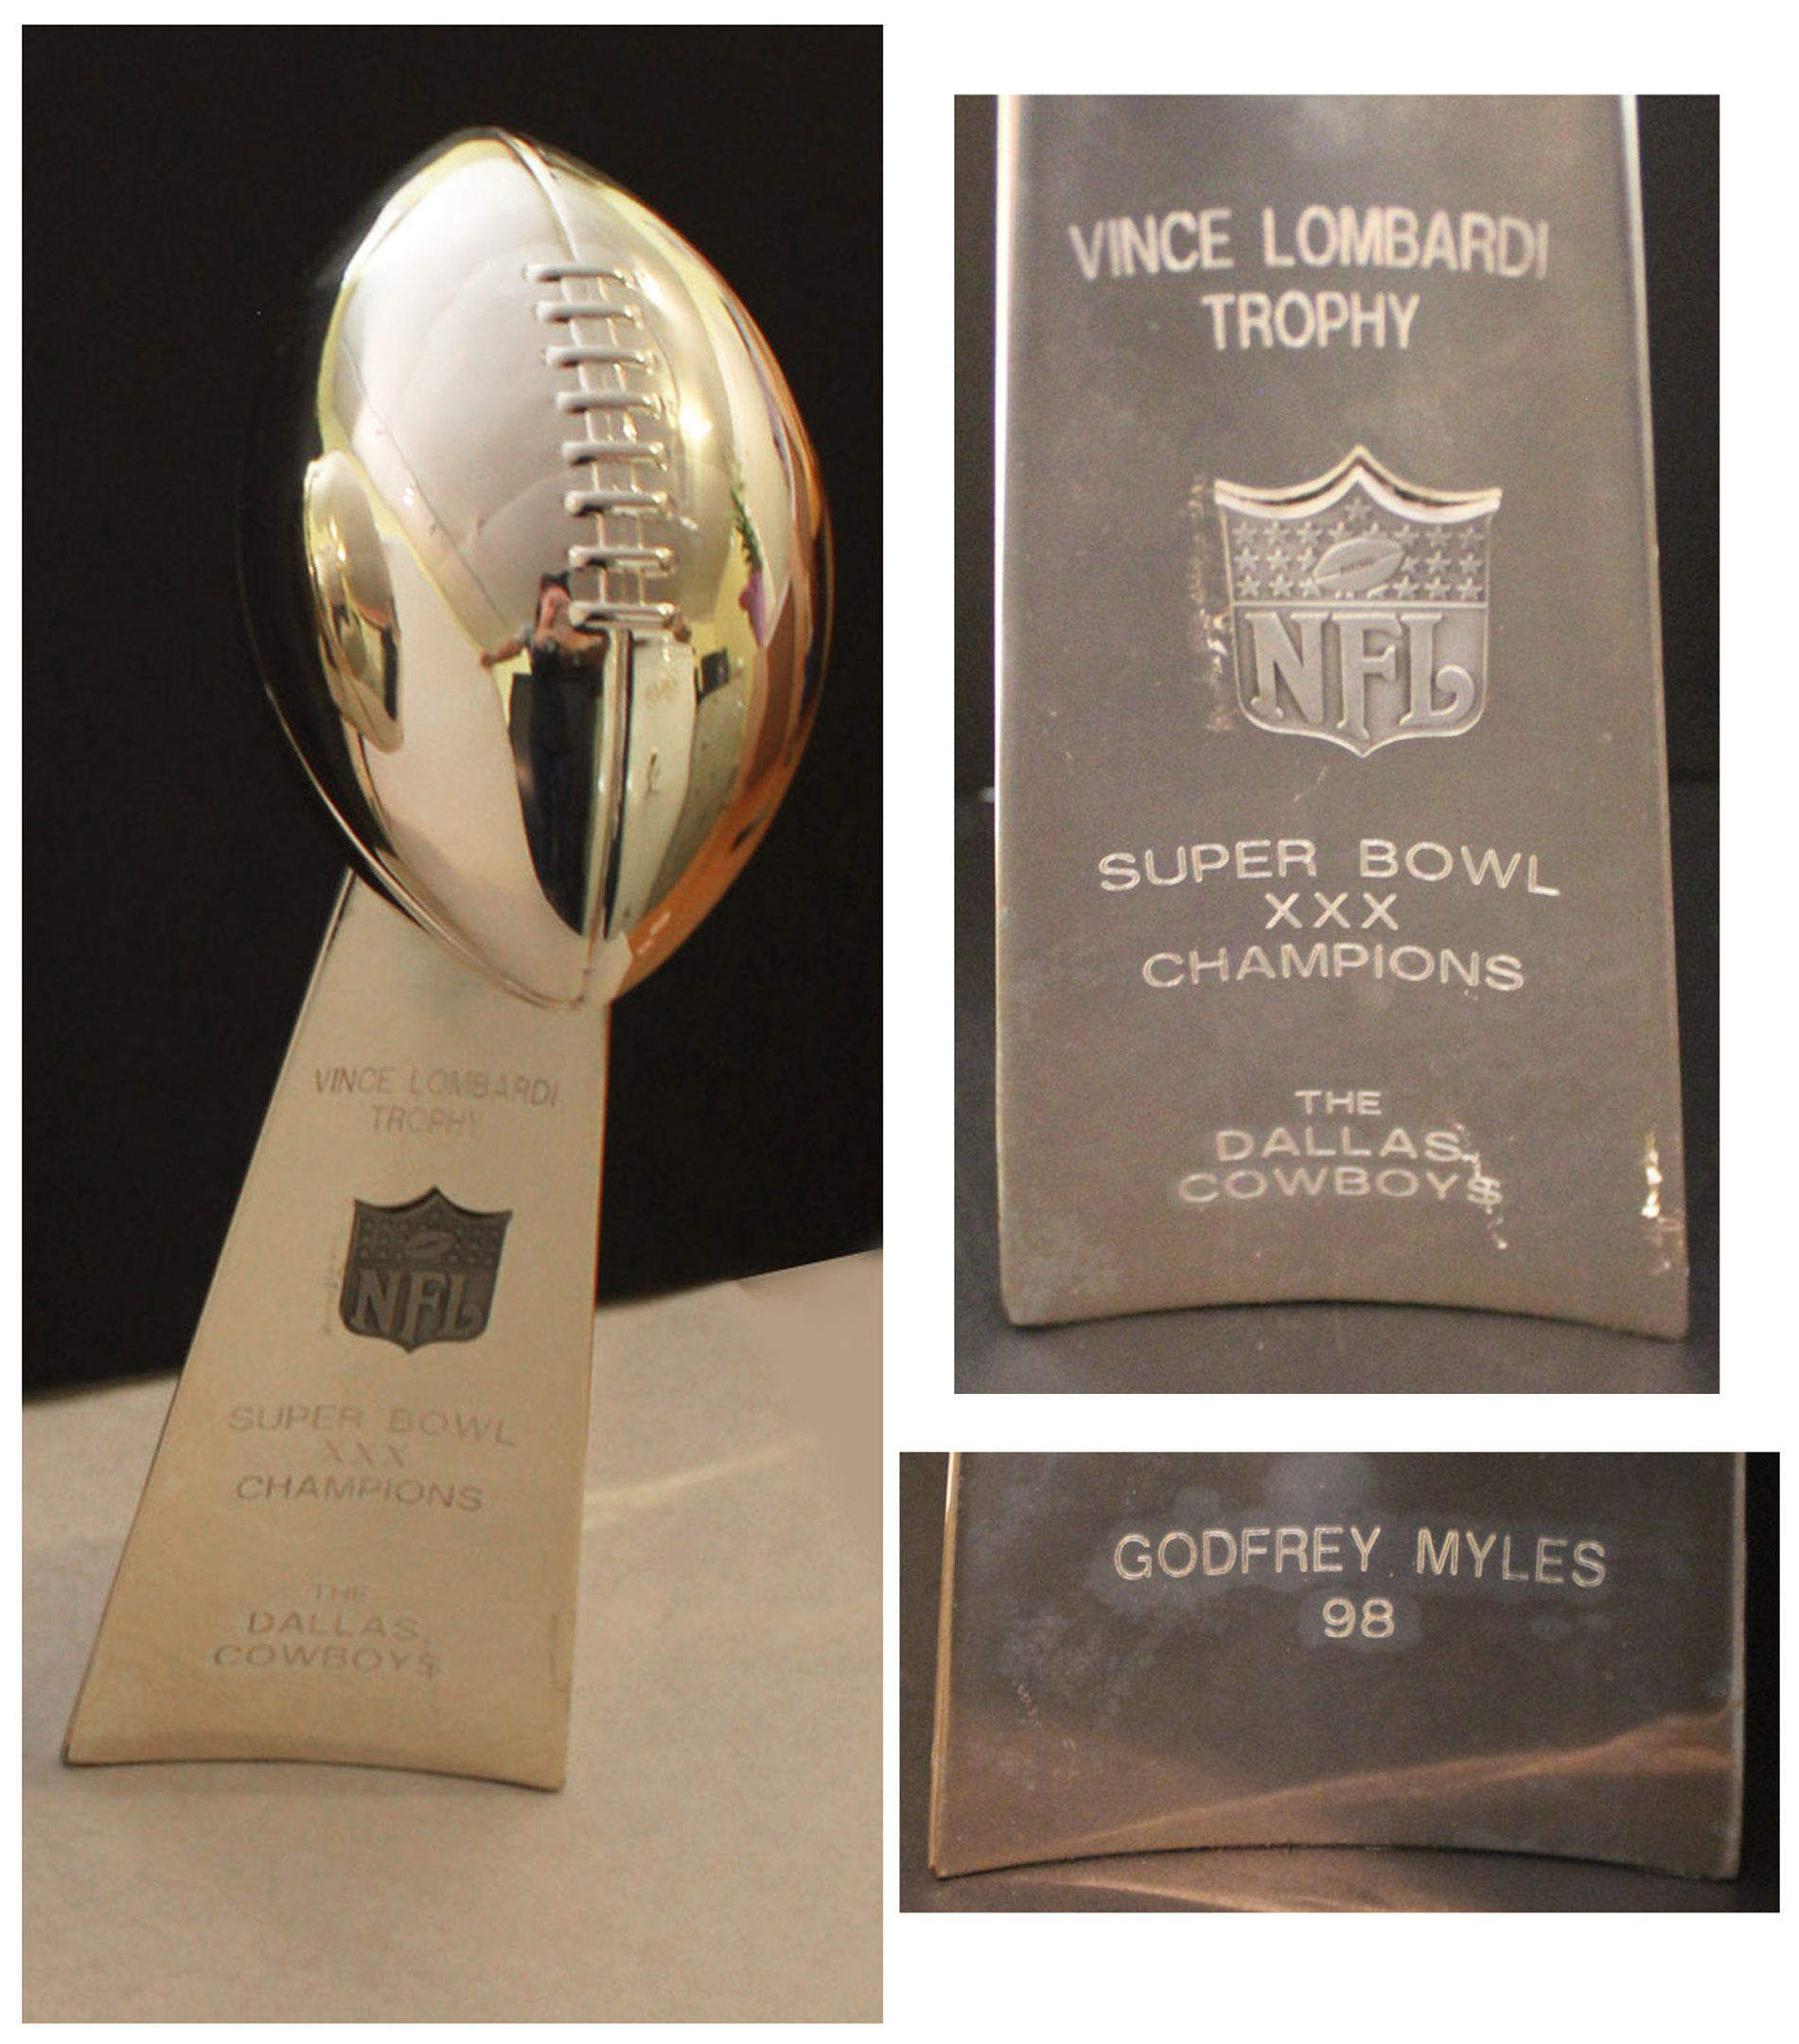 Super Bowl trophy auction Vince Lombardi Super Bowl XXX Trophy -- Exceedingly Rare Trophy Was Made for Players of Only a Few Super Bowl Winning Teams -- Given to Cowboys Linebacker Godfrey Myles